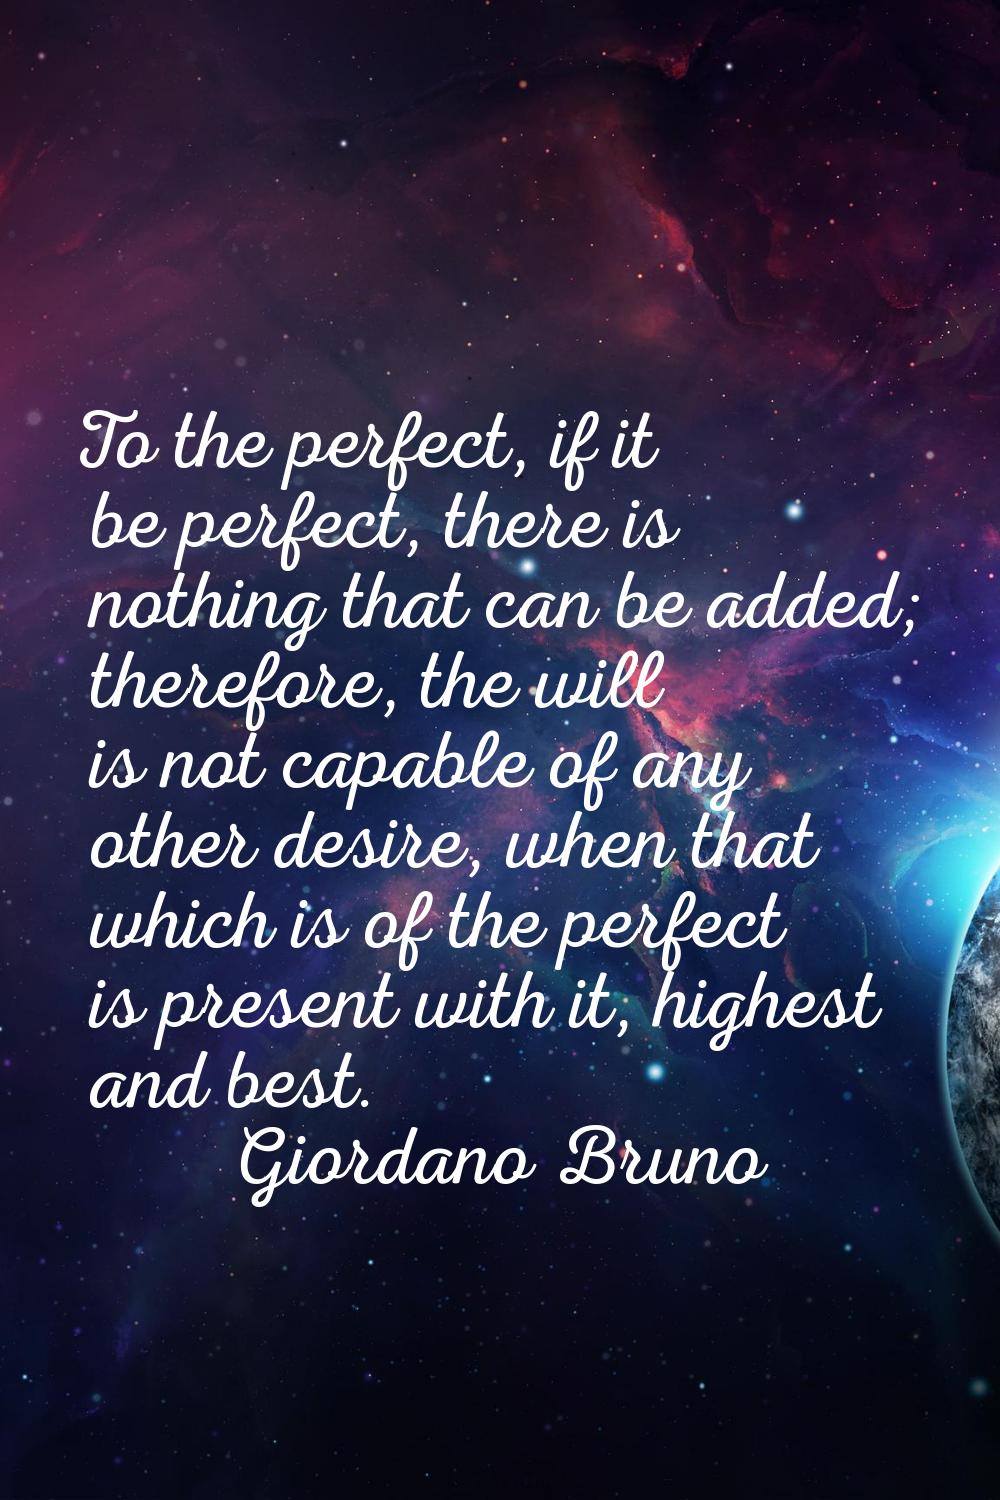 To the perfect, if it be perfect, there is nothing that can be added; therefore, the will is not ca